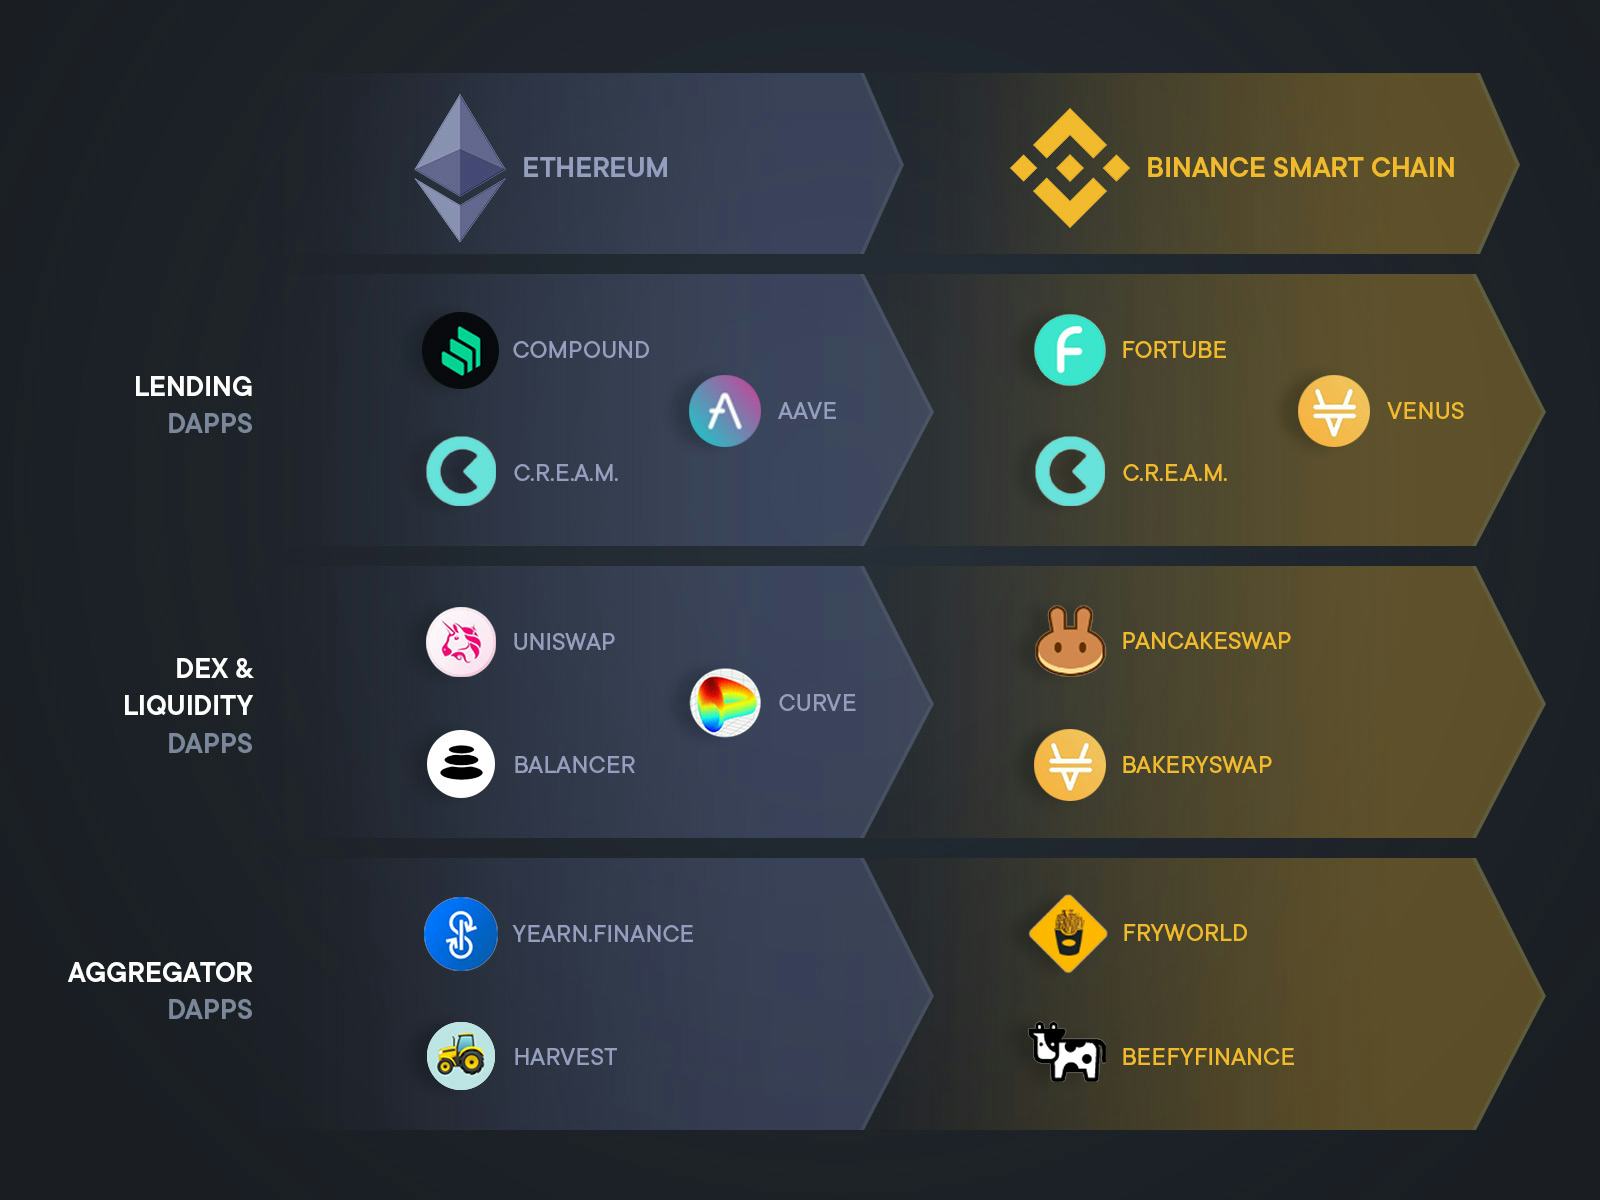 Overview of largest yield farming dApps present in Ethereum and those in Binance Smart Chain